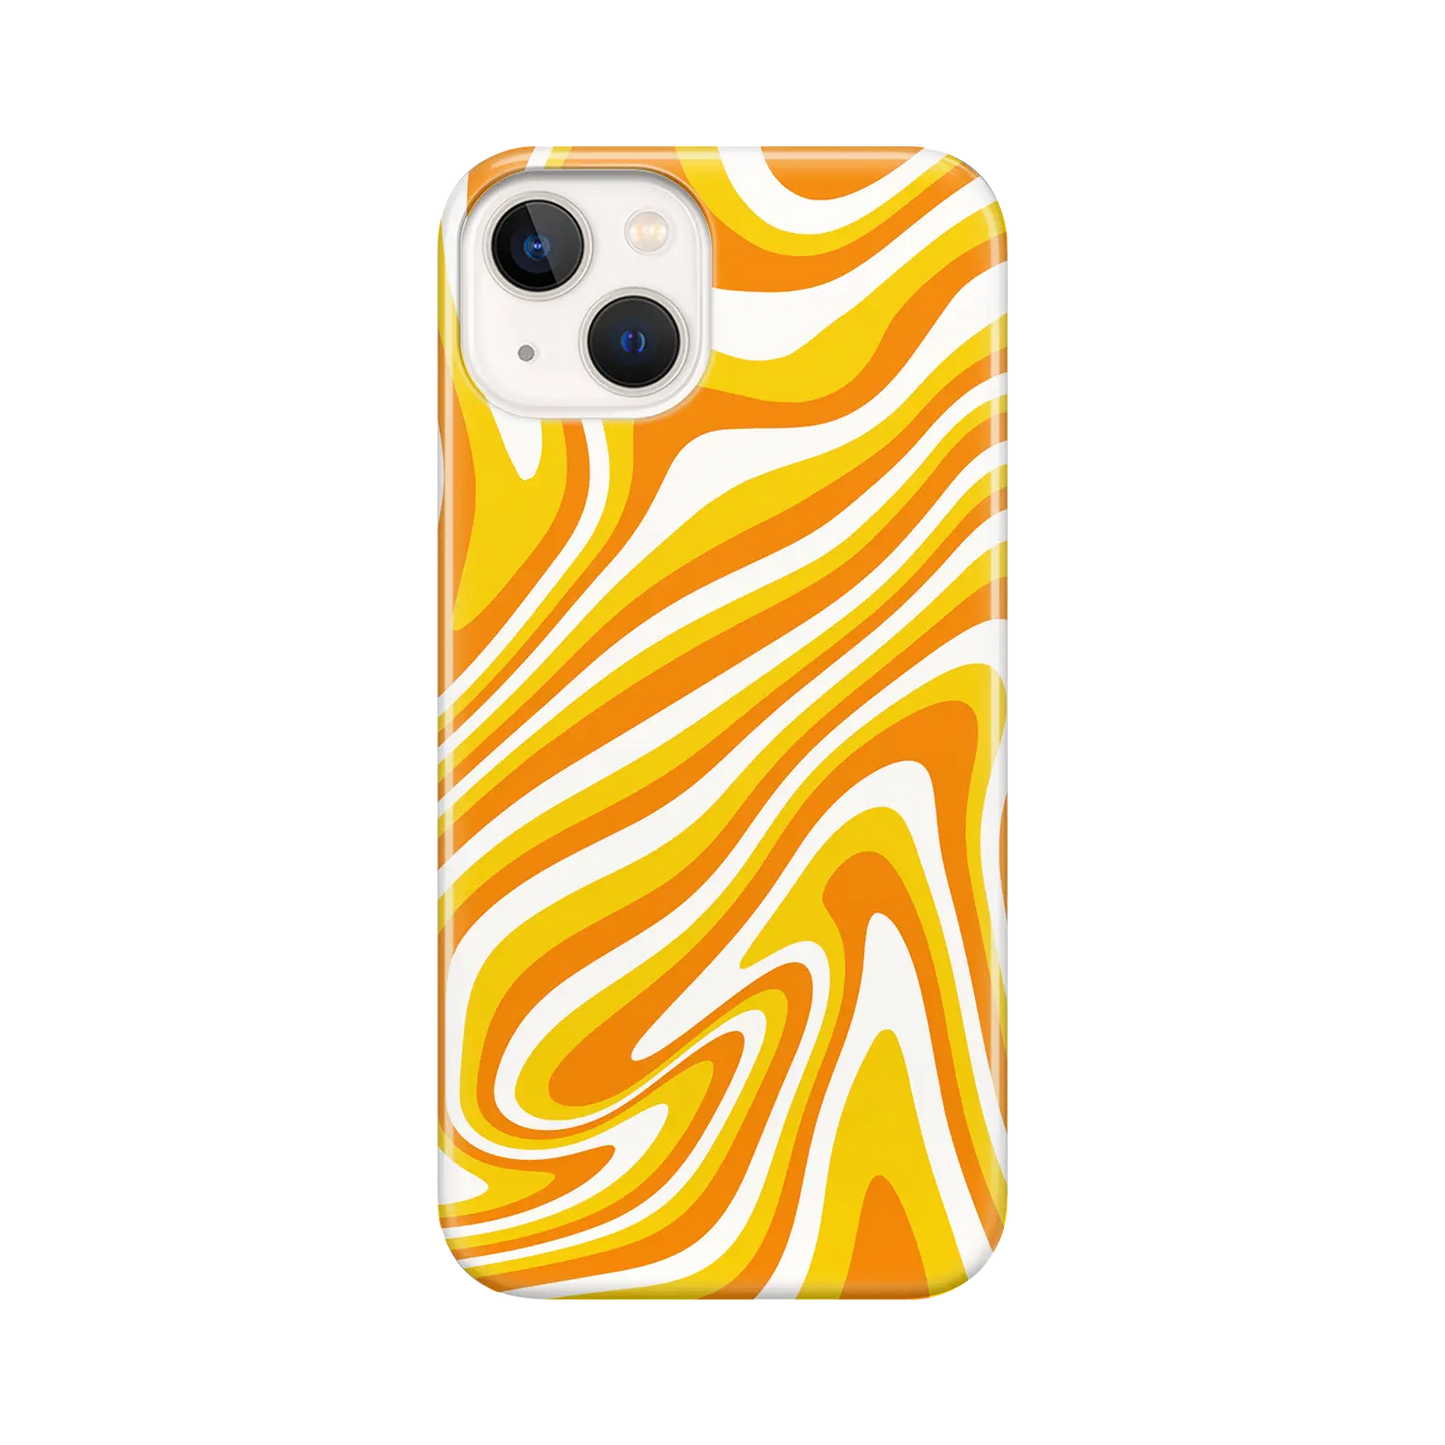 Groovy - Coque iPhone Personnalisée